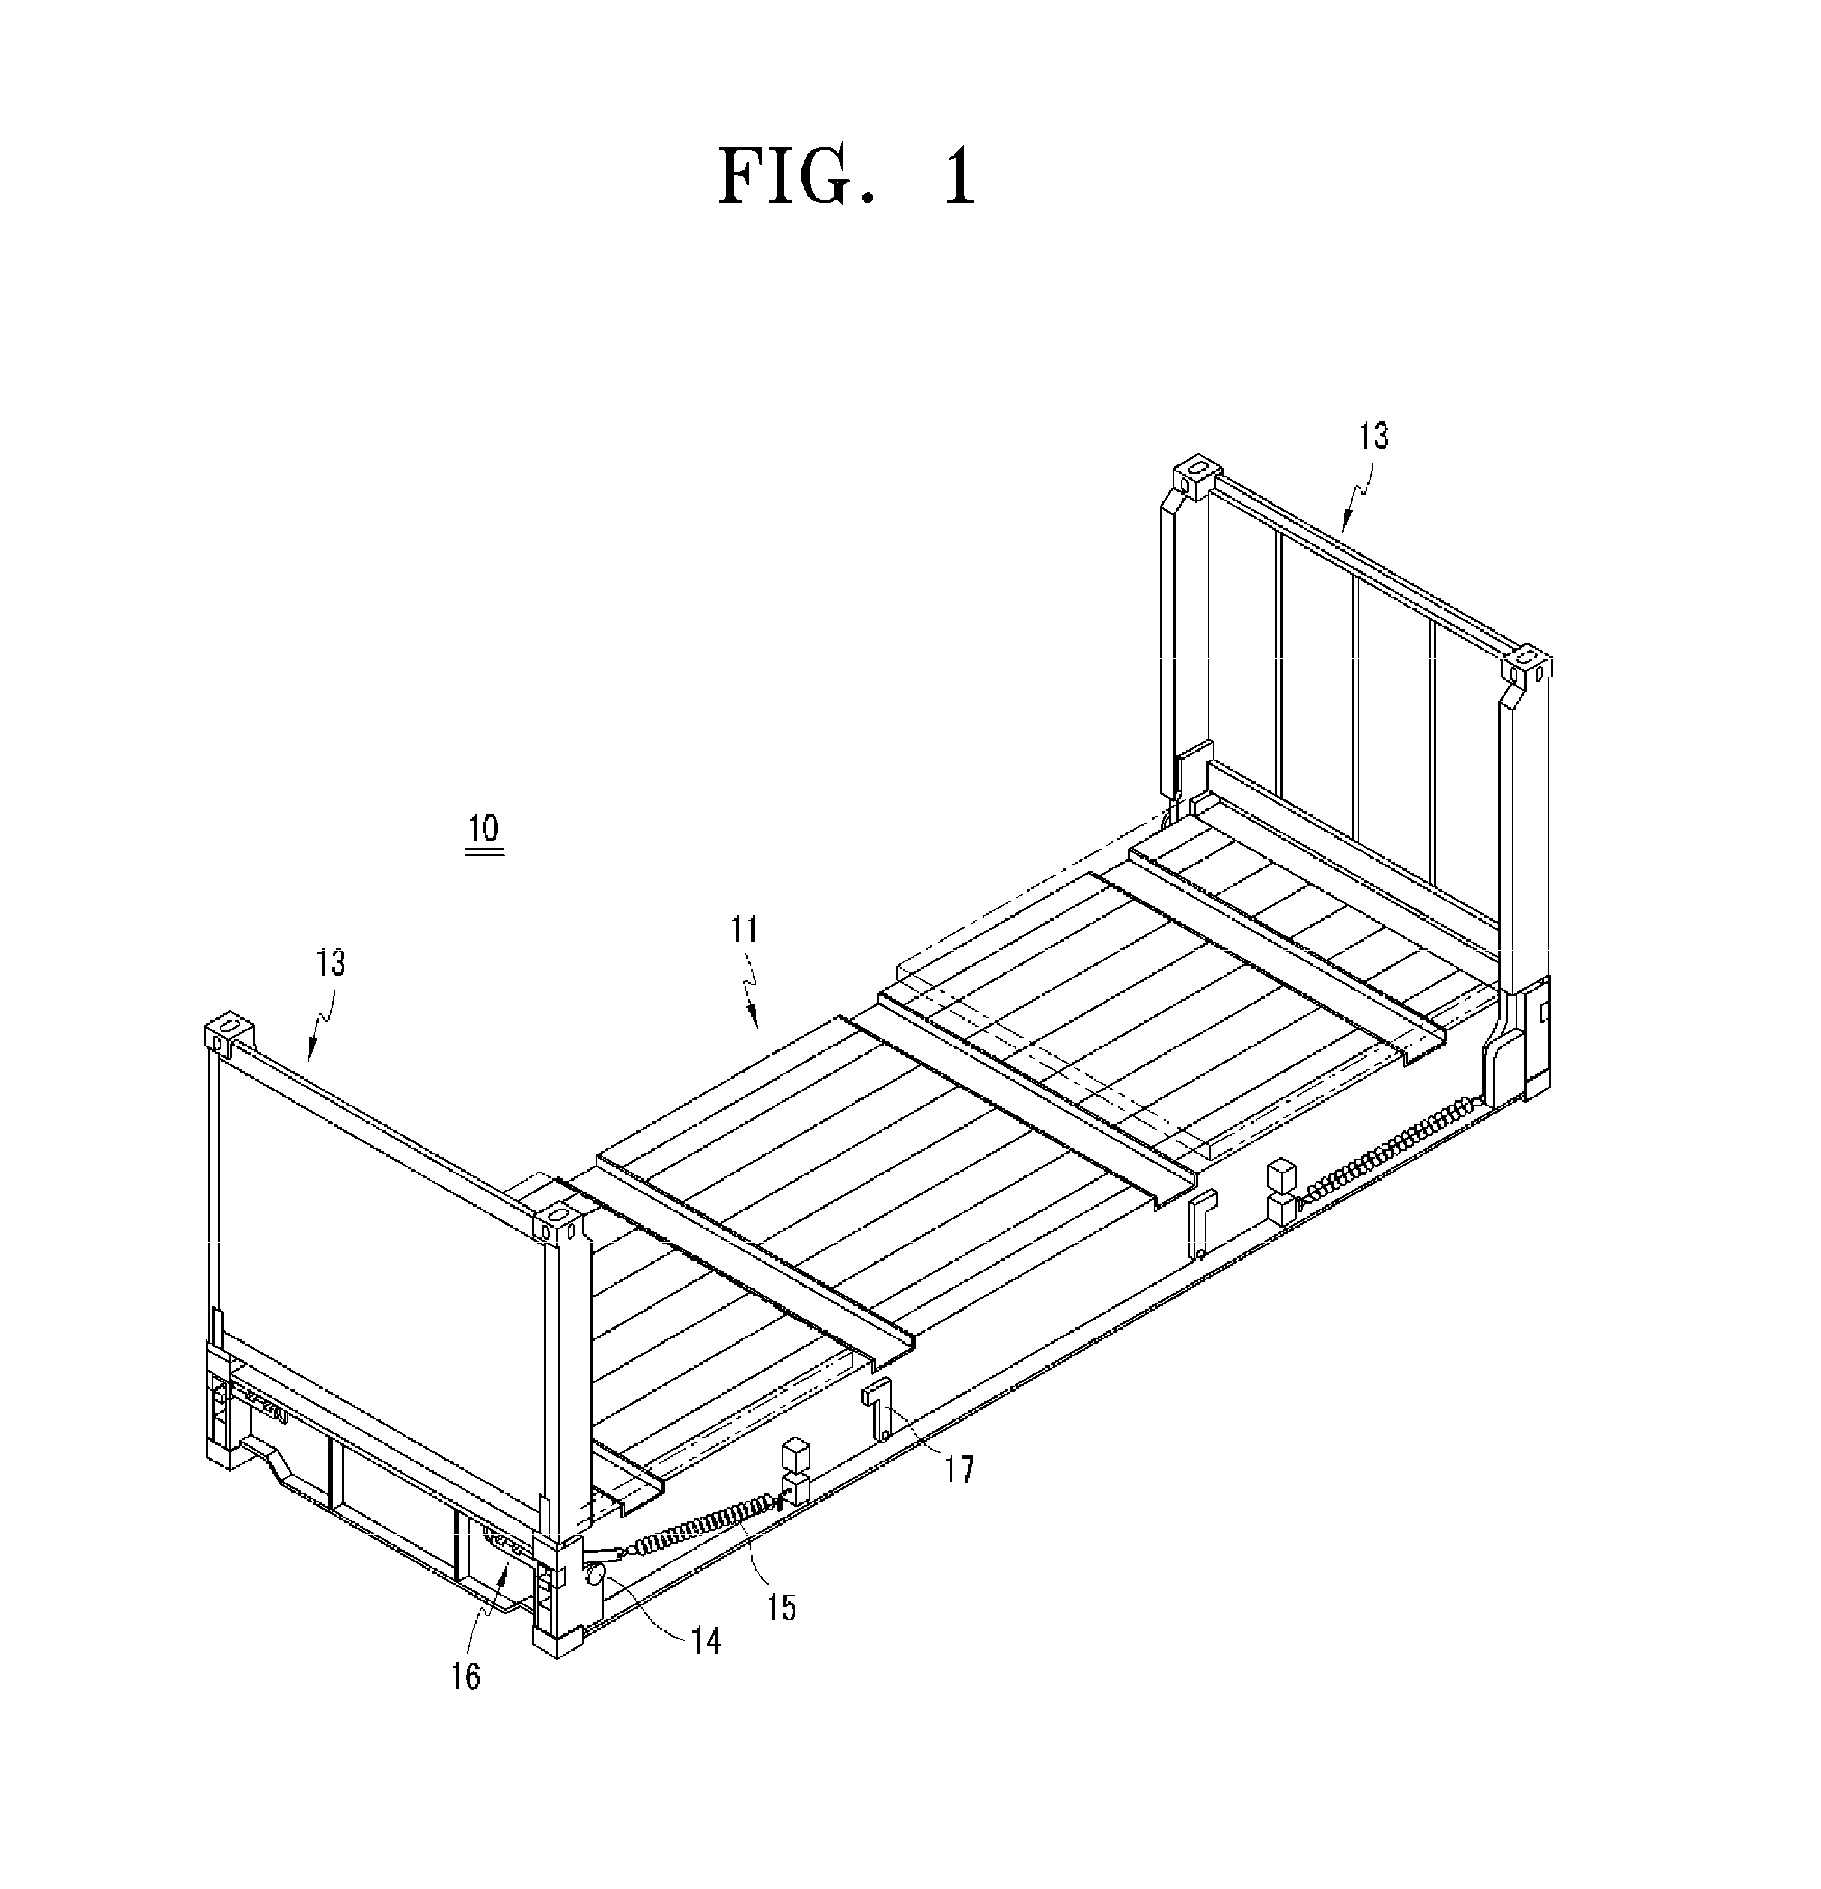 Integral buffering apparatus for automatically controlling flow rate of fluid and flat rack container including the integral buffering apparatus